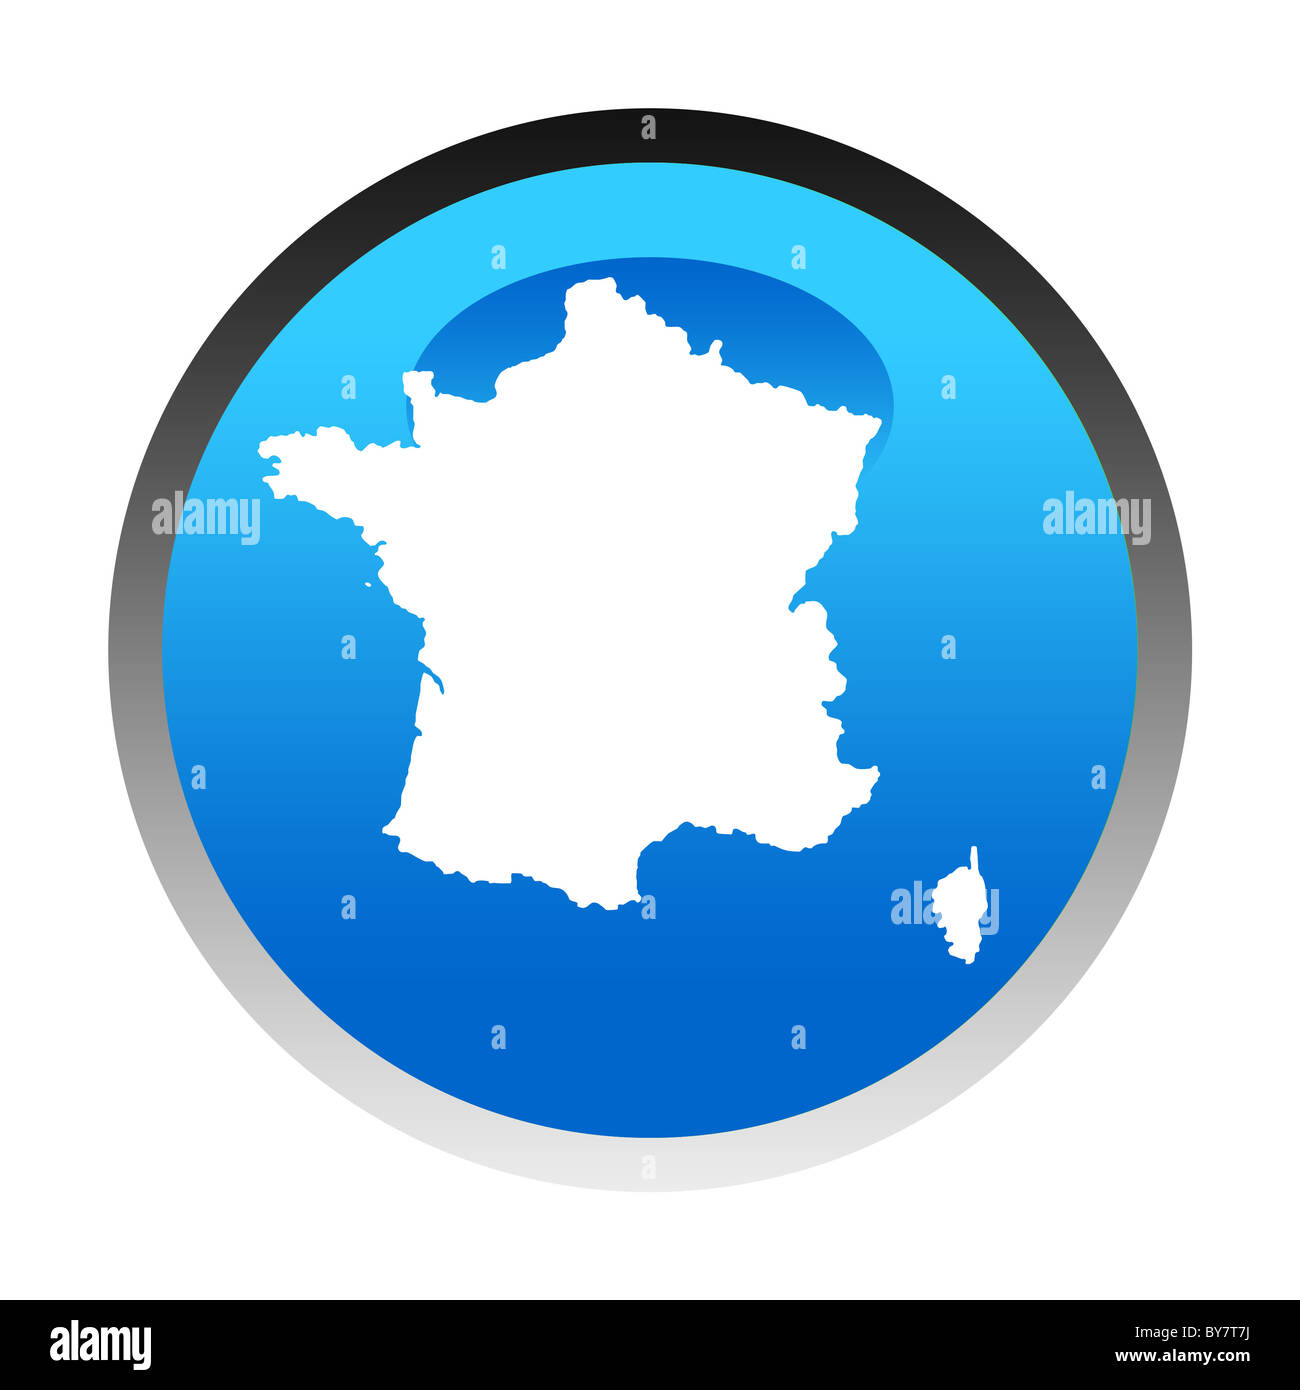 France map blue circular button isolated on white background. Stock Photo